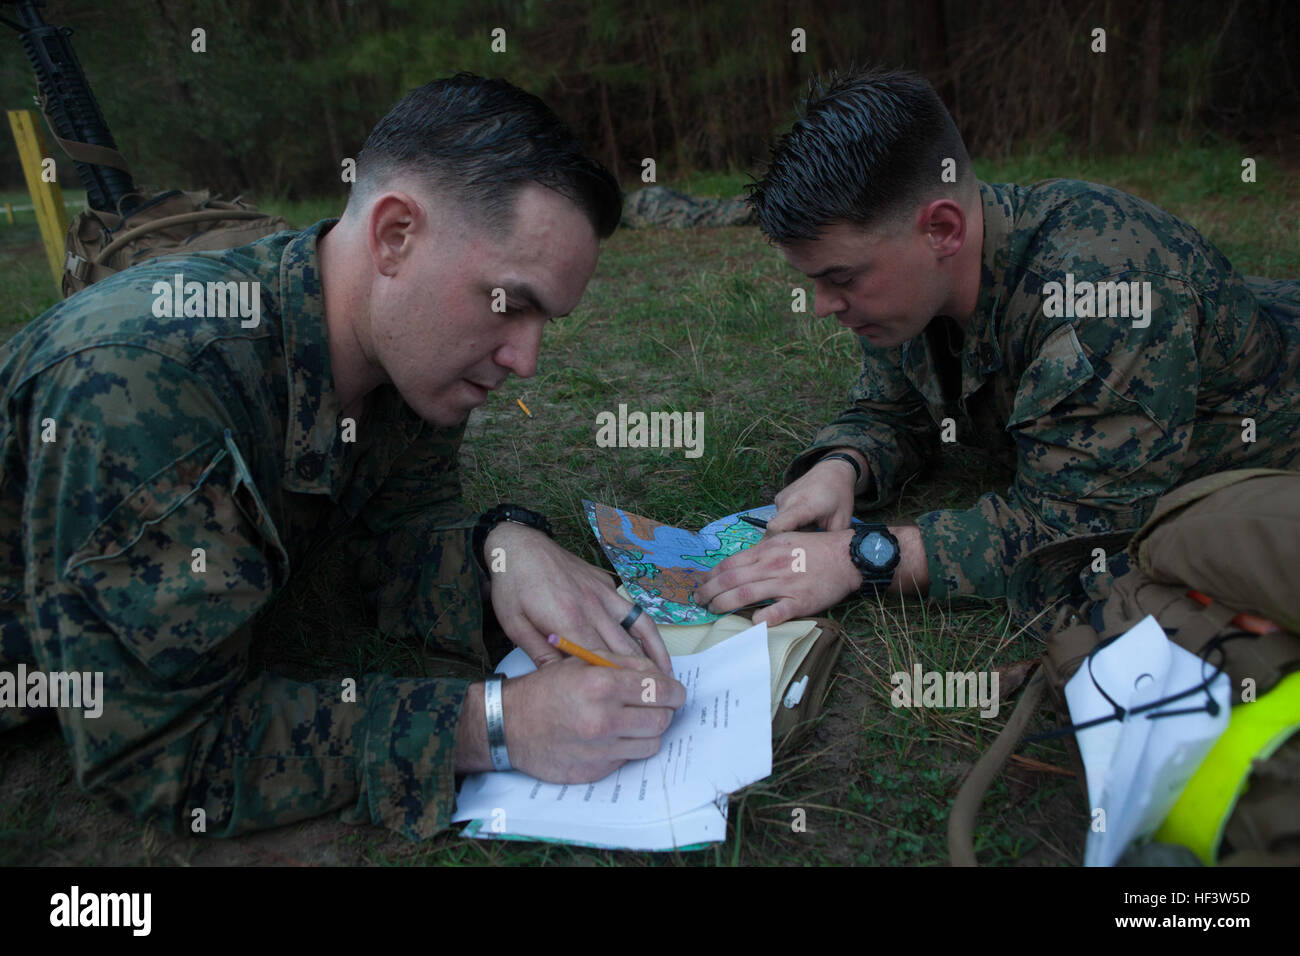 U.S. Marines with the Marine Corps Combat Instructor School, School of Infantry-East, plots a map point during the land navigation portion of the Combat Instructor Stakes Competition on Camp Lejeune, N.C., March 16, 2015. The School of Infantry-East hosted the Combat Instructor Stakes, which is a grueling 30-hour competition that pits two man teams against each other, competing in physical, tactical and knowledge based events while carrying a combat load and moving over 50 kilometers on foot. (U.S. Marine Corps photo by Lance Cpl. Jose Villalobosrocha) Combat Instructor Stakes 160316-M-GY546-0 Stock Photo